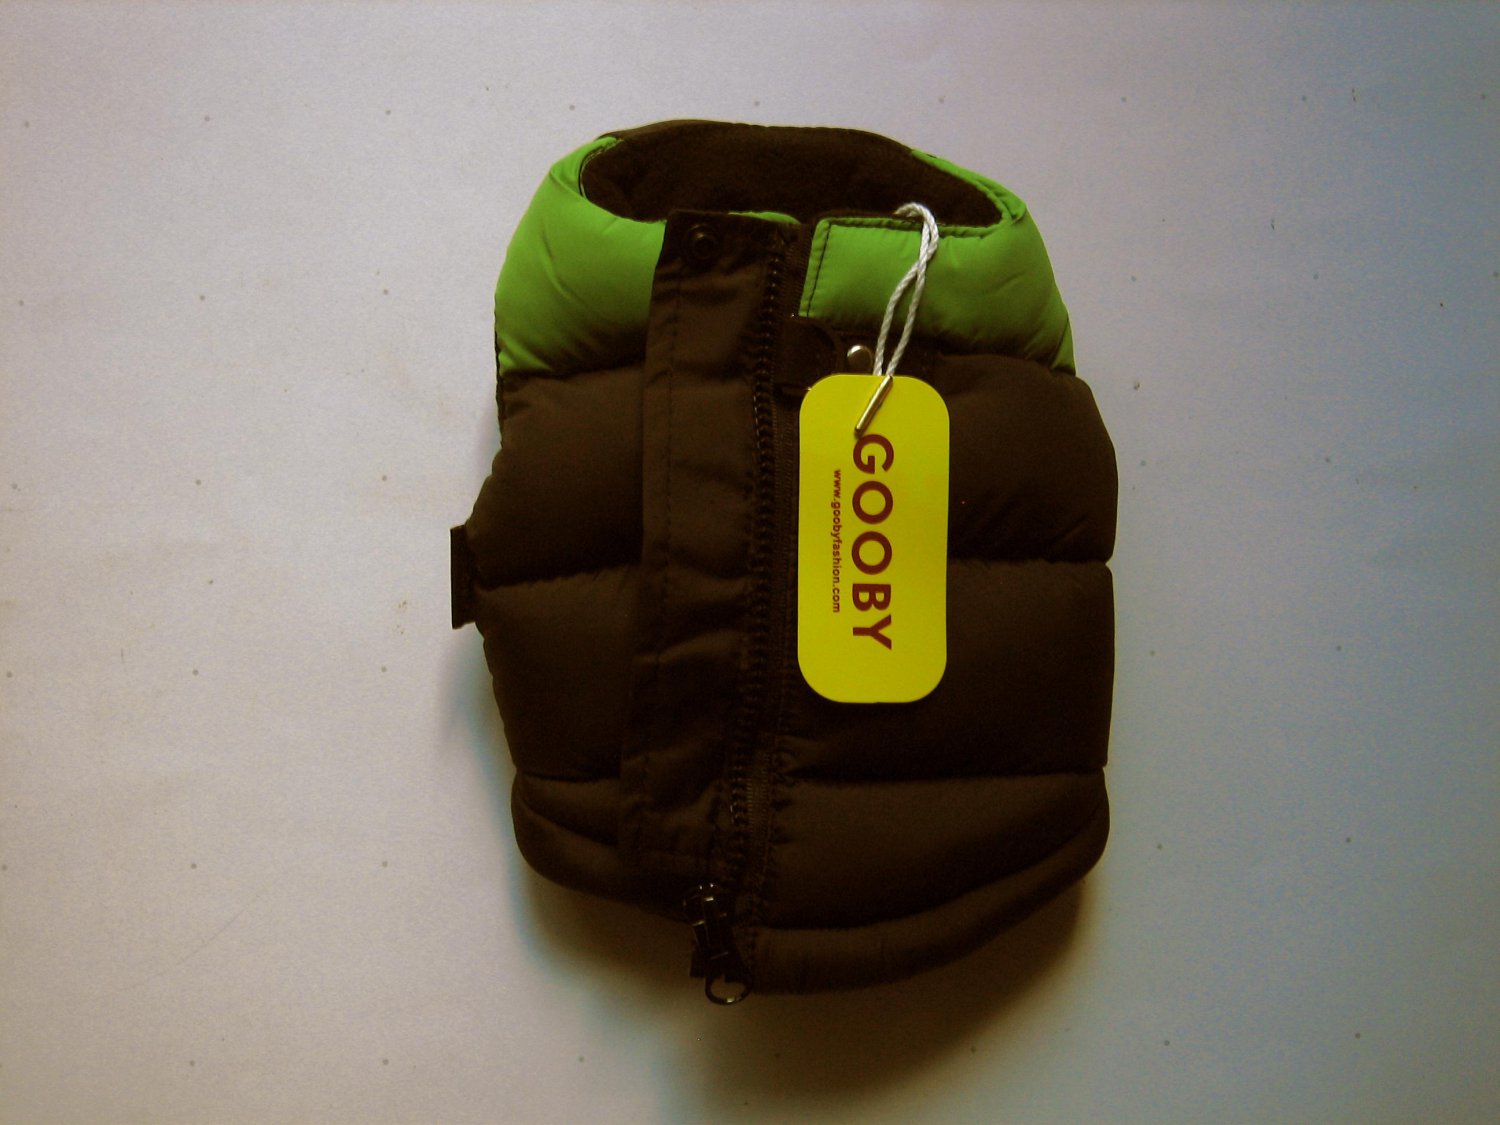 NEW Gooby Pet Padded Dog Vest  X-Small